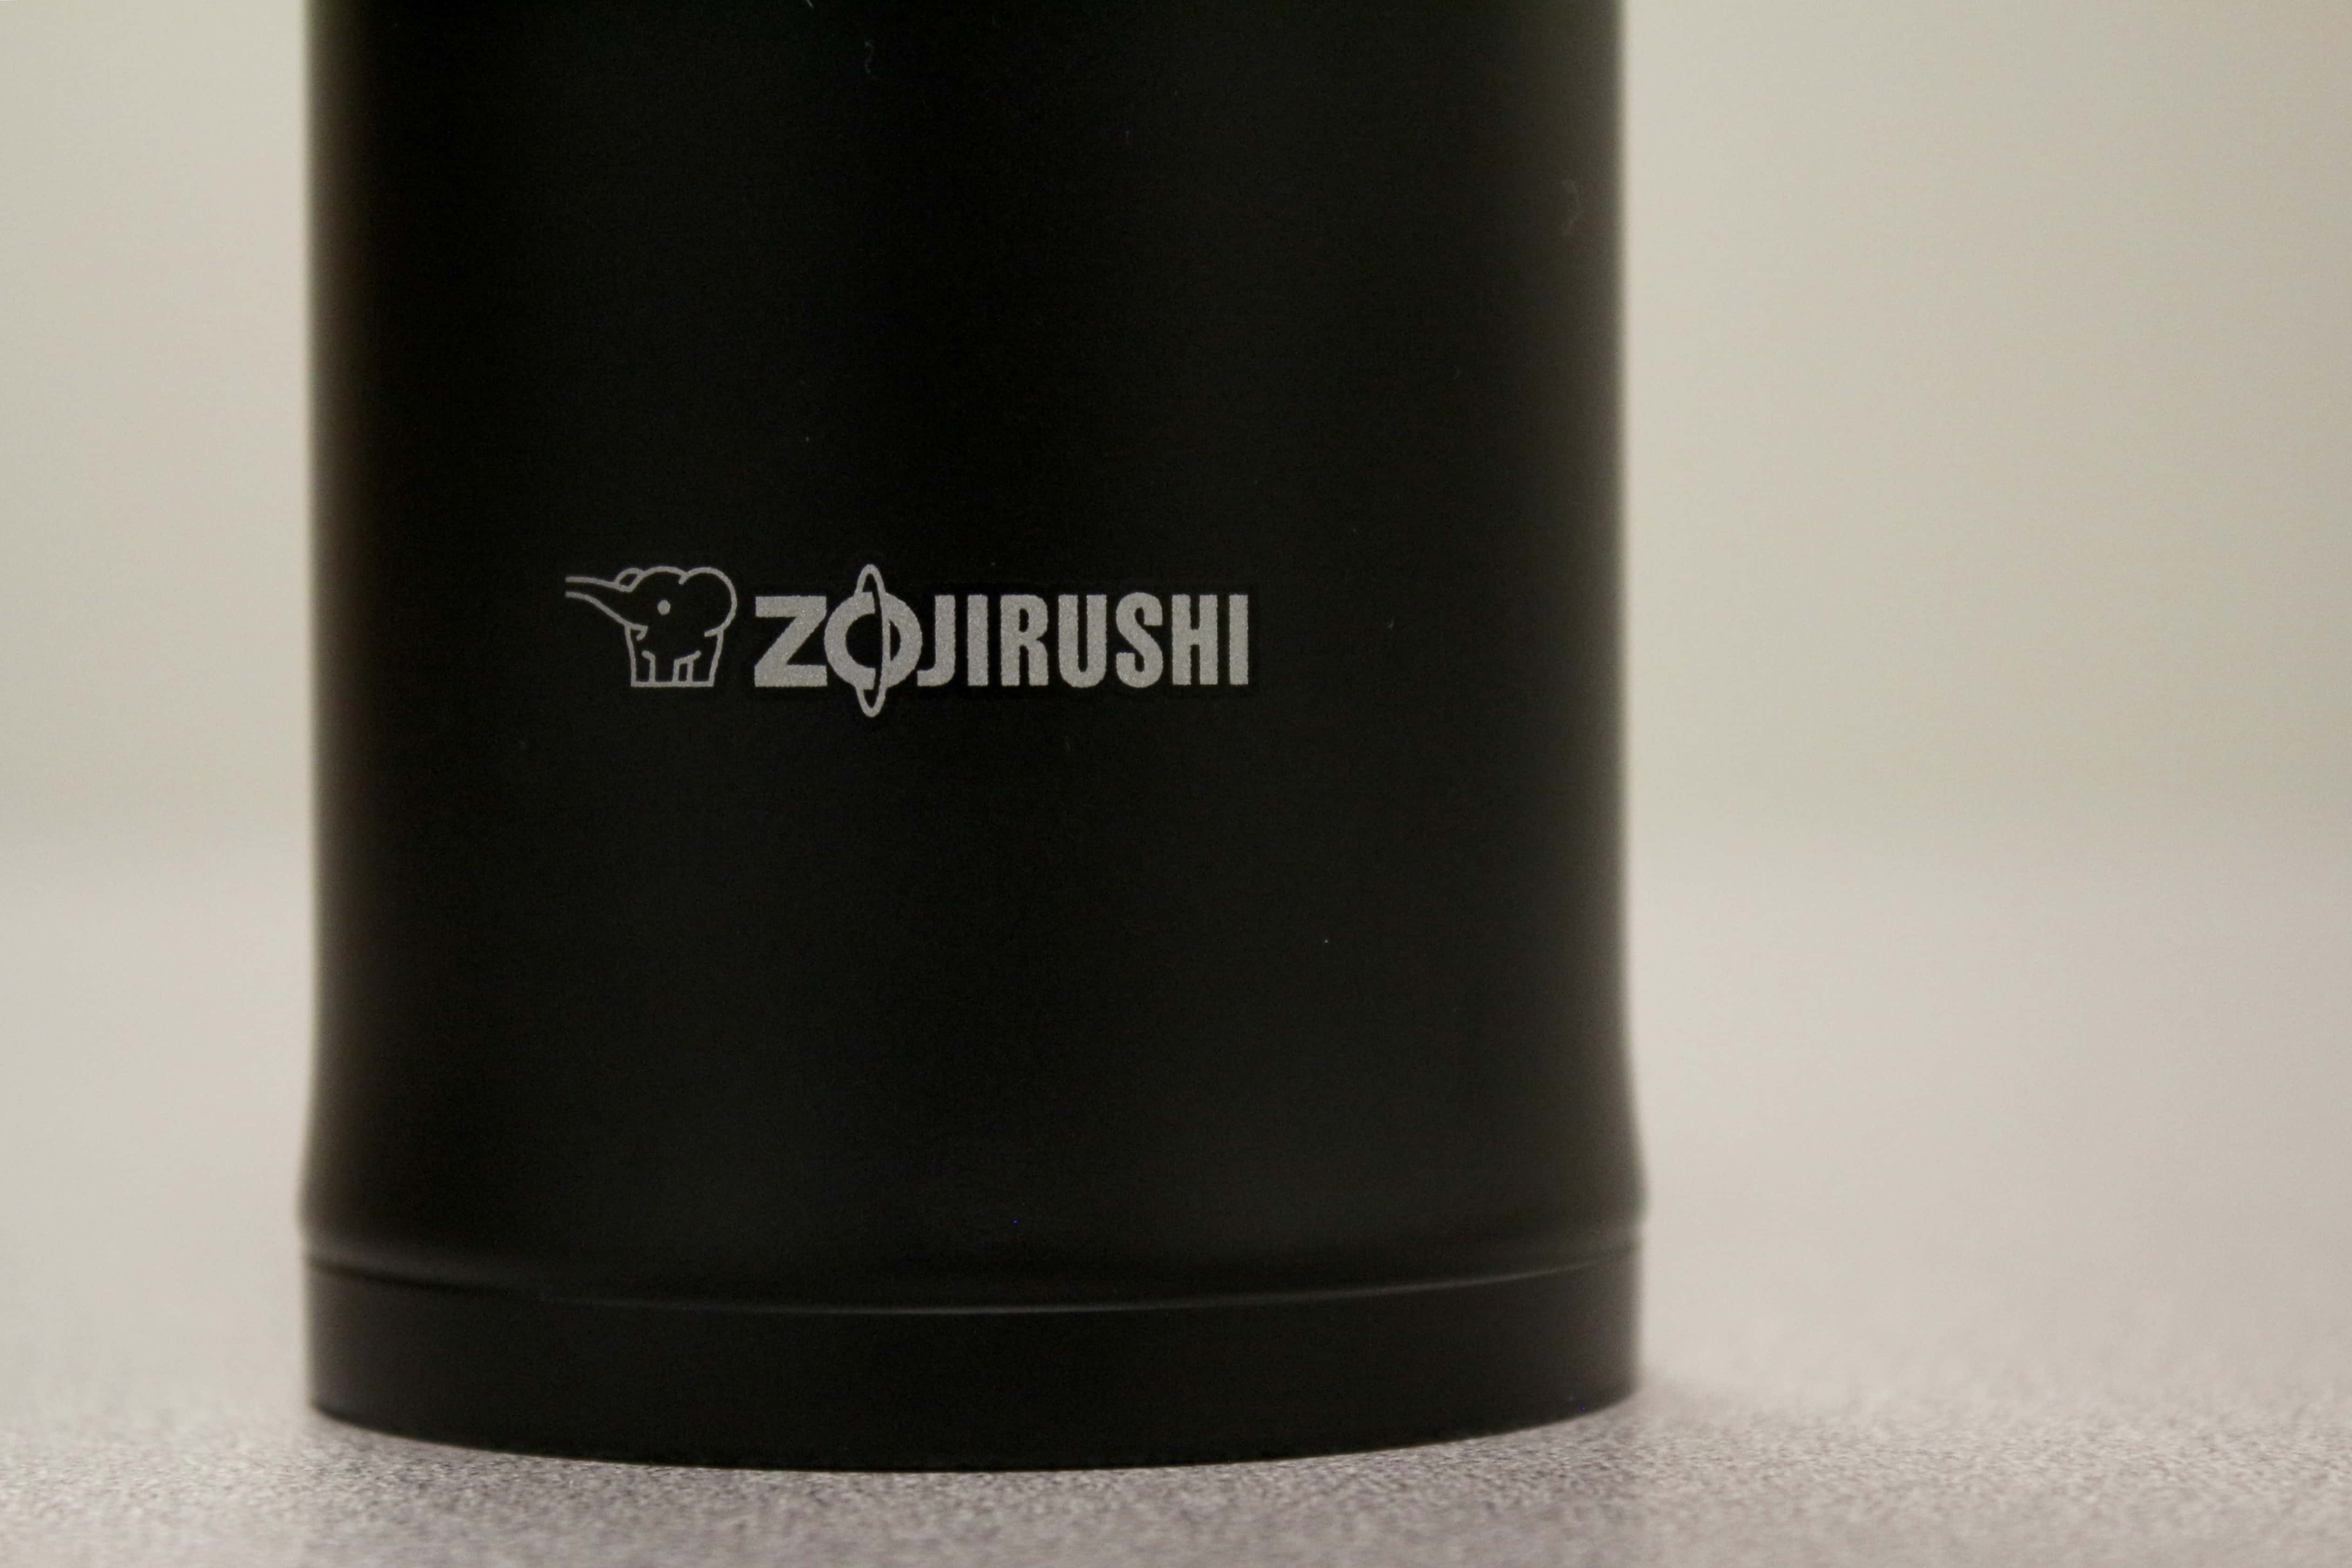 Zojirushi Logo - A Review of the Zojirushi Stainless Steel Mug — Tools and Toys